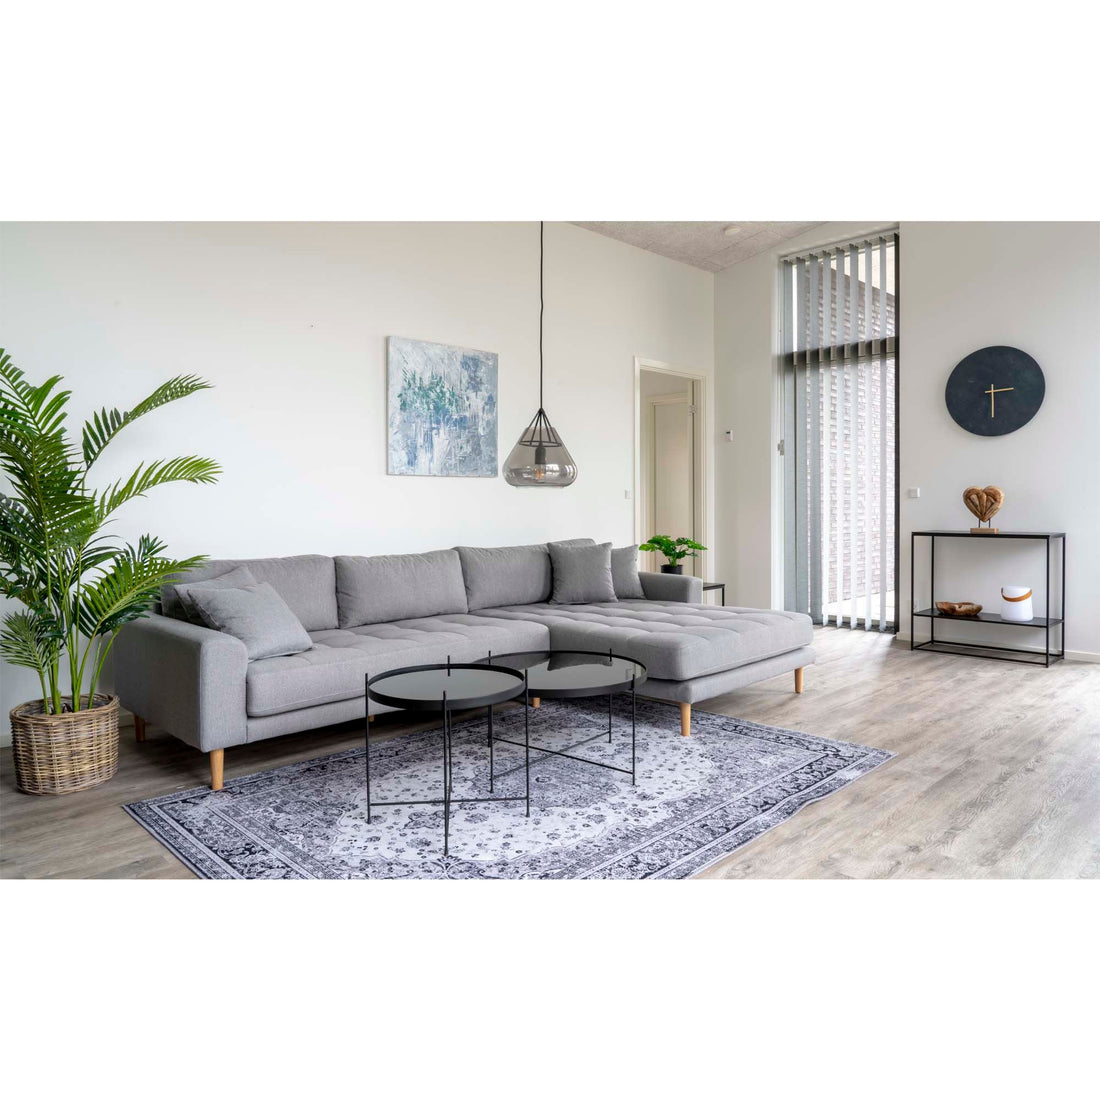 Lido Lounge Sofa - Lounge Sofa, right -wing in light gray with four pillows and nature wooden legs, HN1001 - 1 - pcs